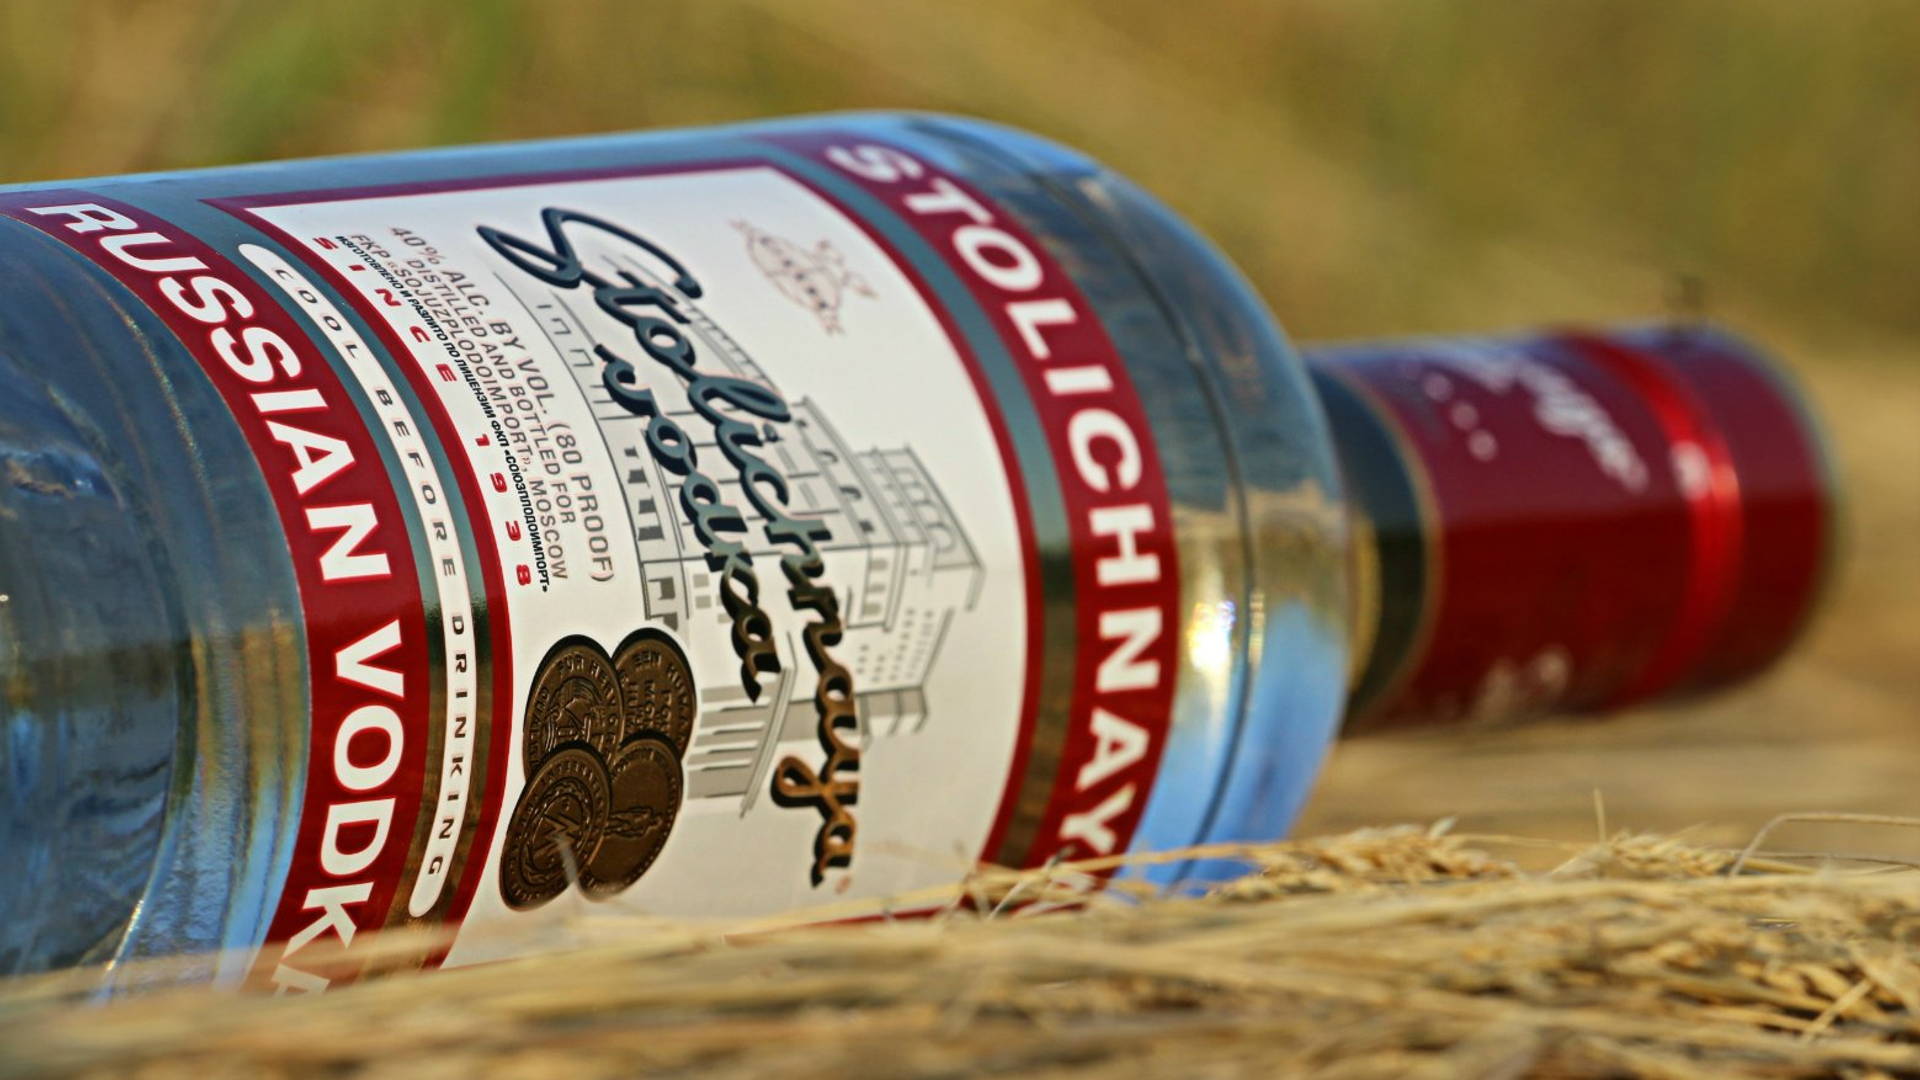 Featured image for Stolichnaya To Rebrand As 'Stoli' After Russian Invasion Of Ukraine